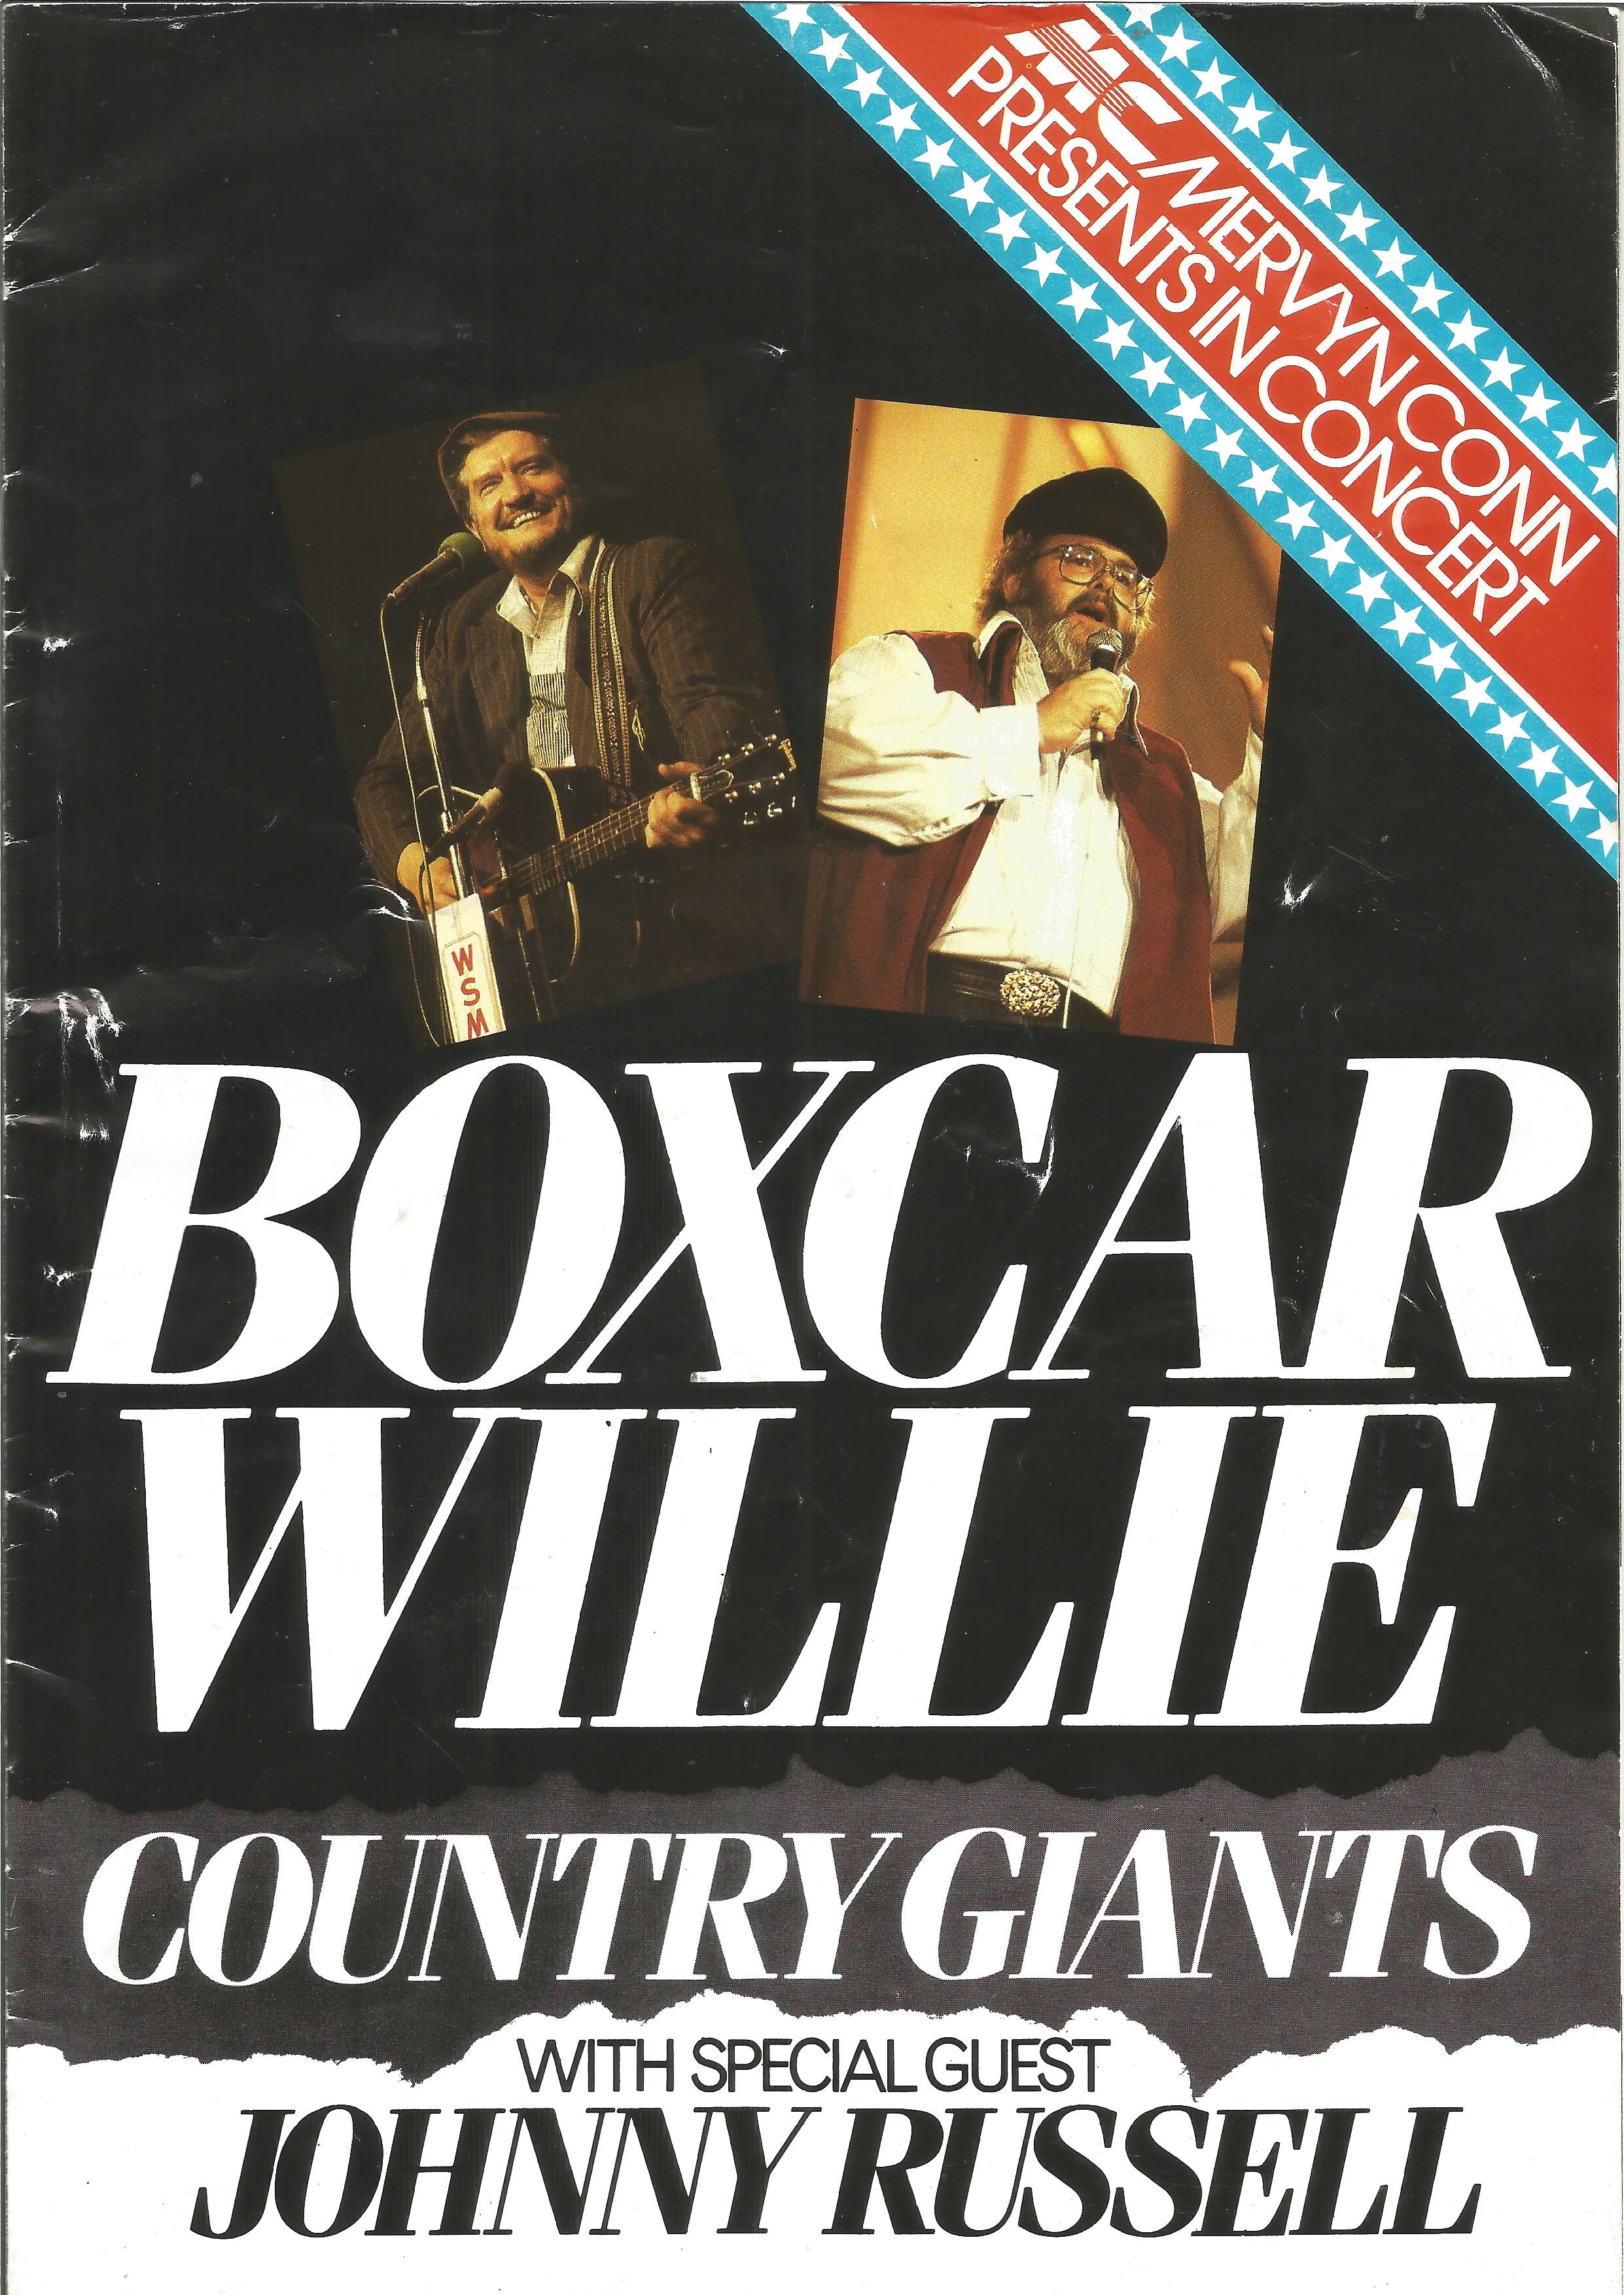 Boxcar Willie and Johnny Russell signed concert programme. Good Condition. All autographs come